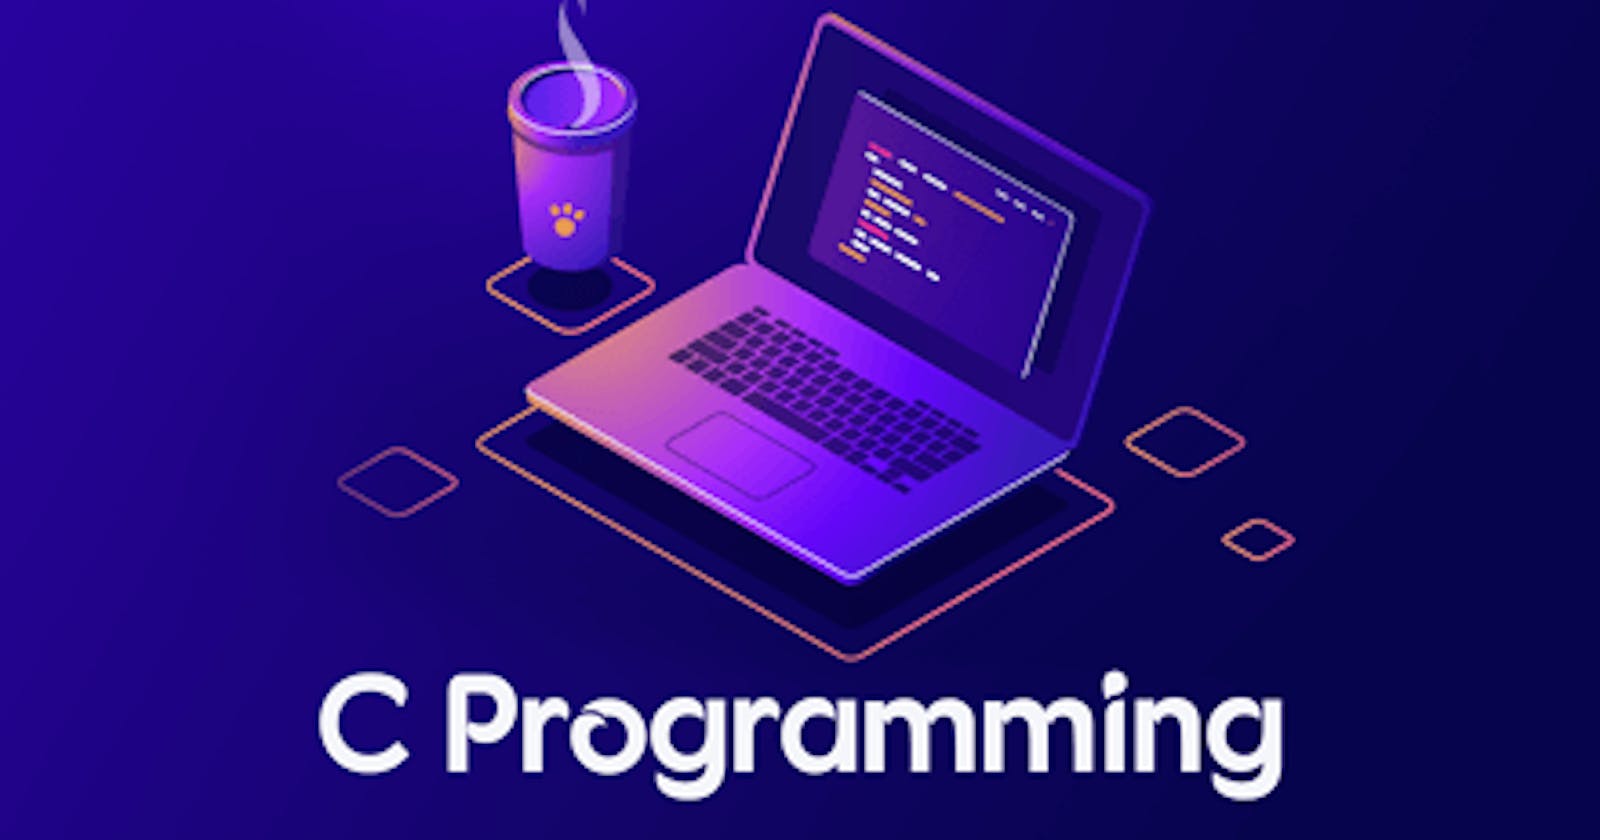 What you need to know to get started in C 
programming language.